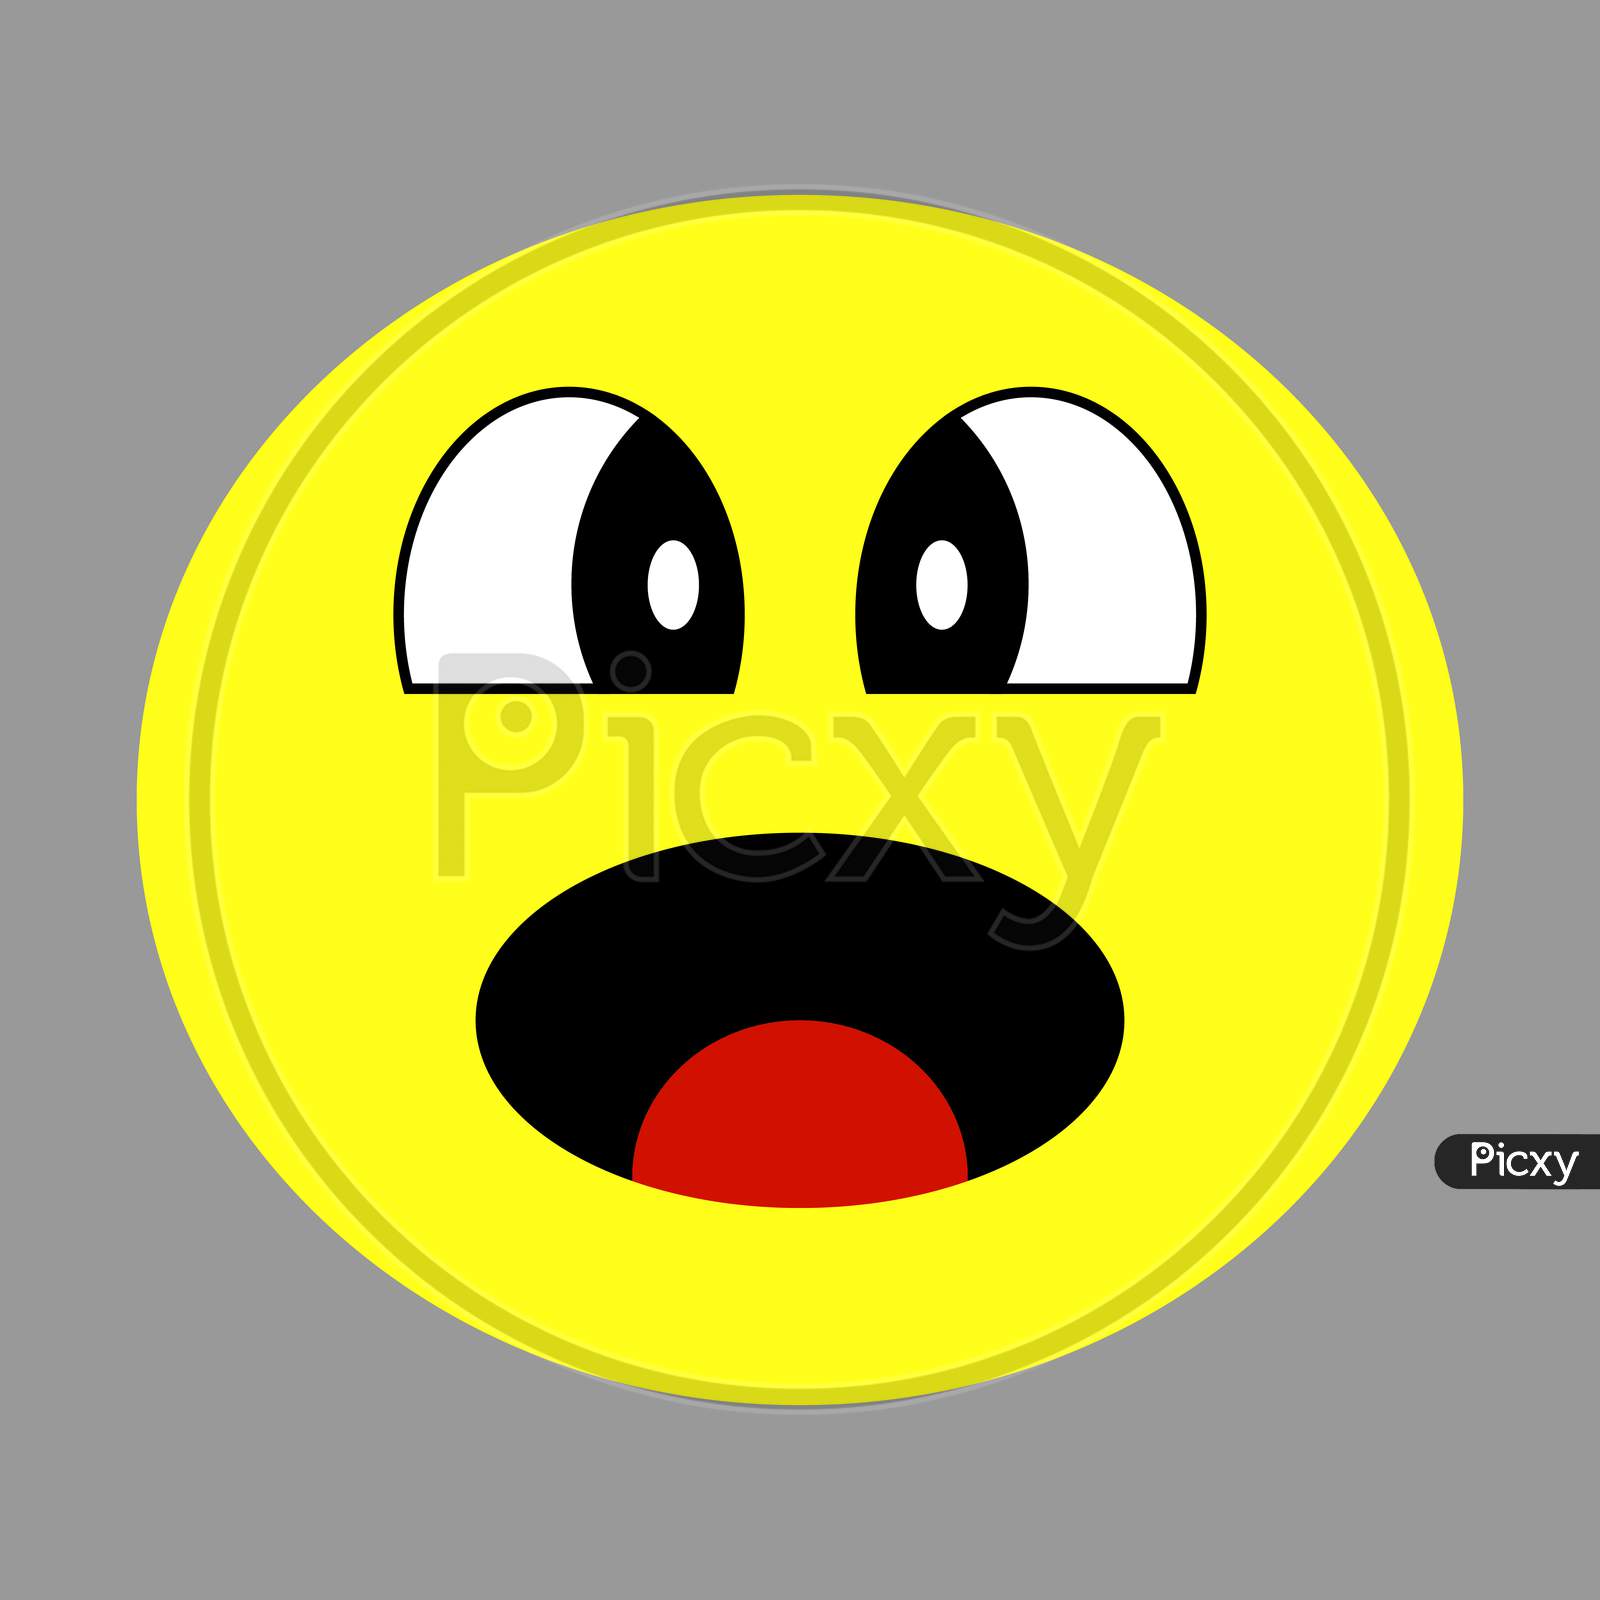 smiley face with tongue sticking out logo